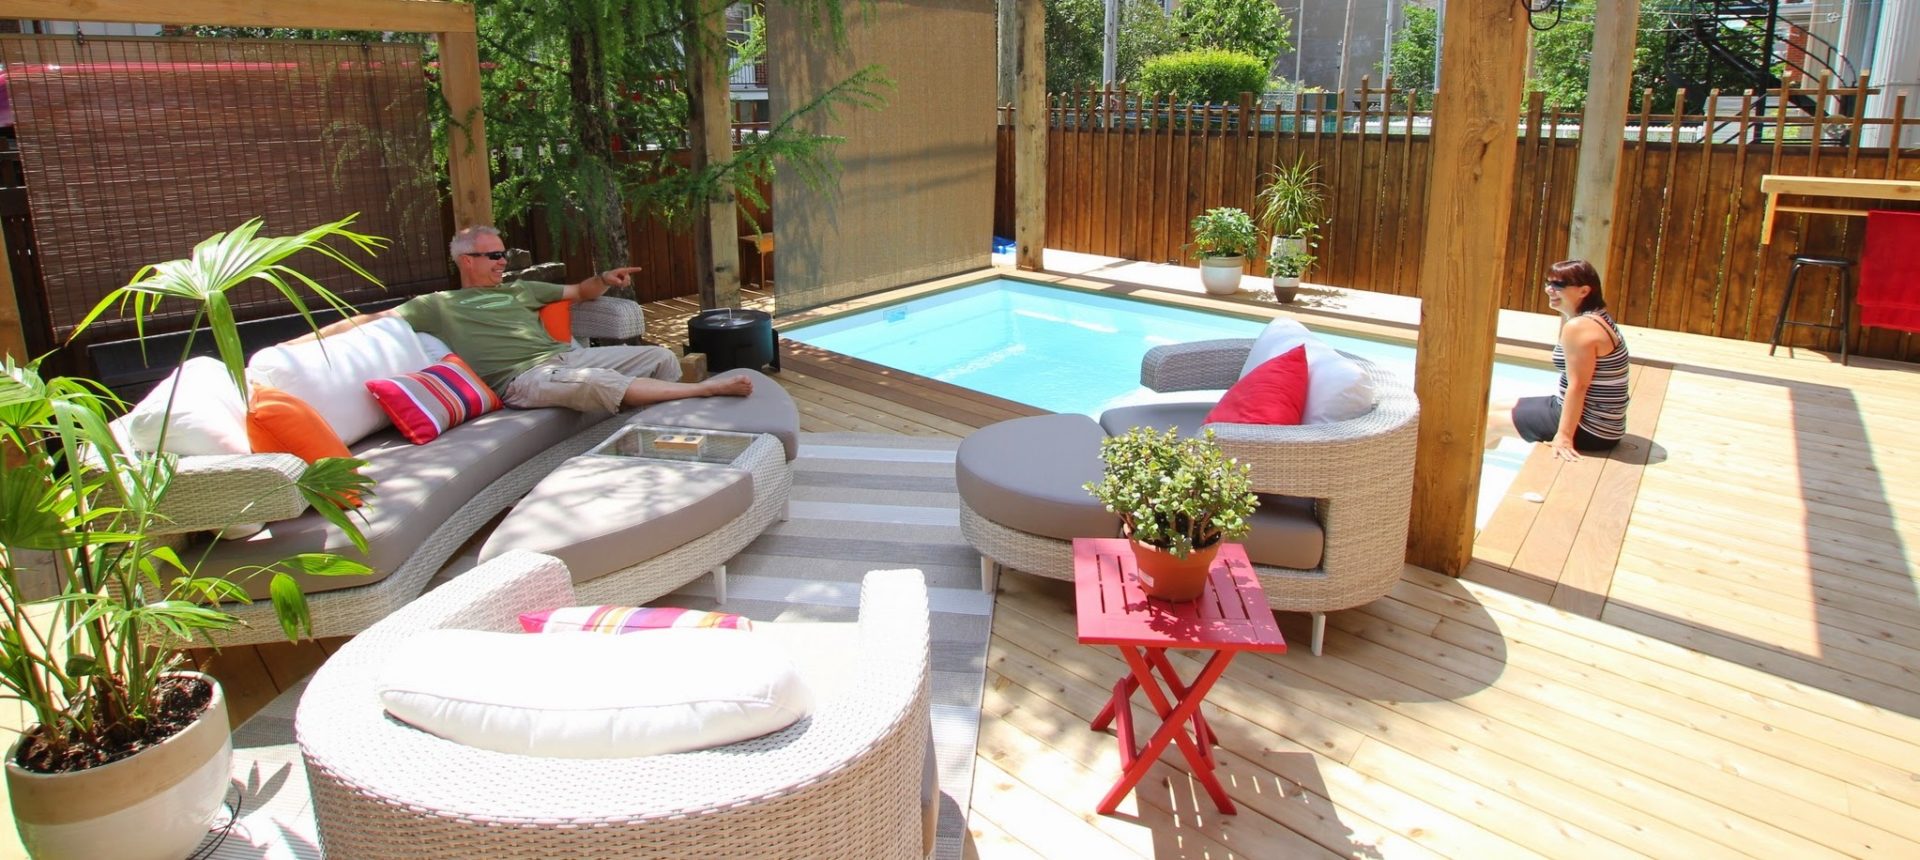 Deck with built-in pool